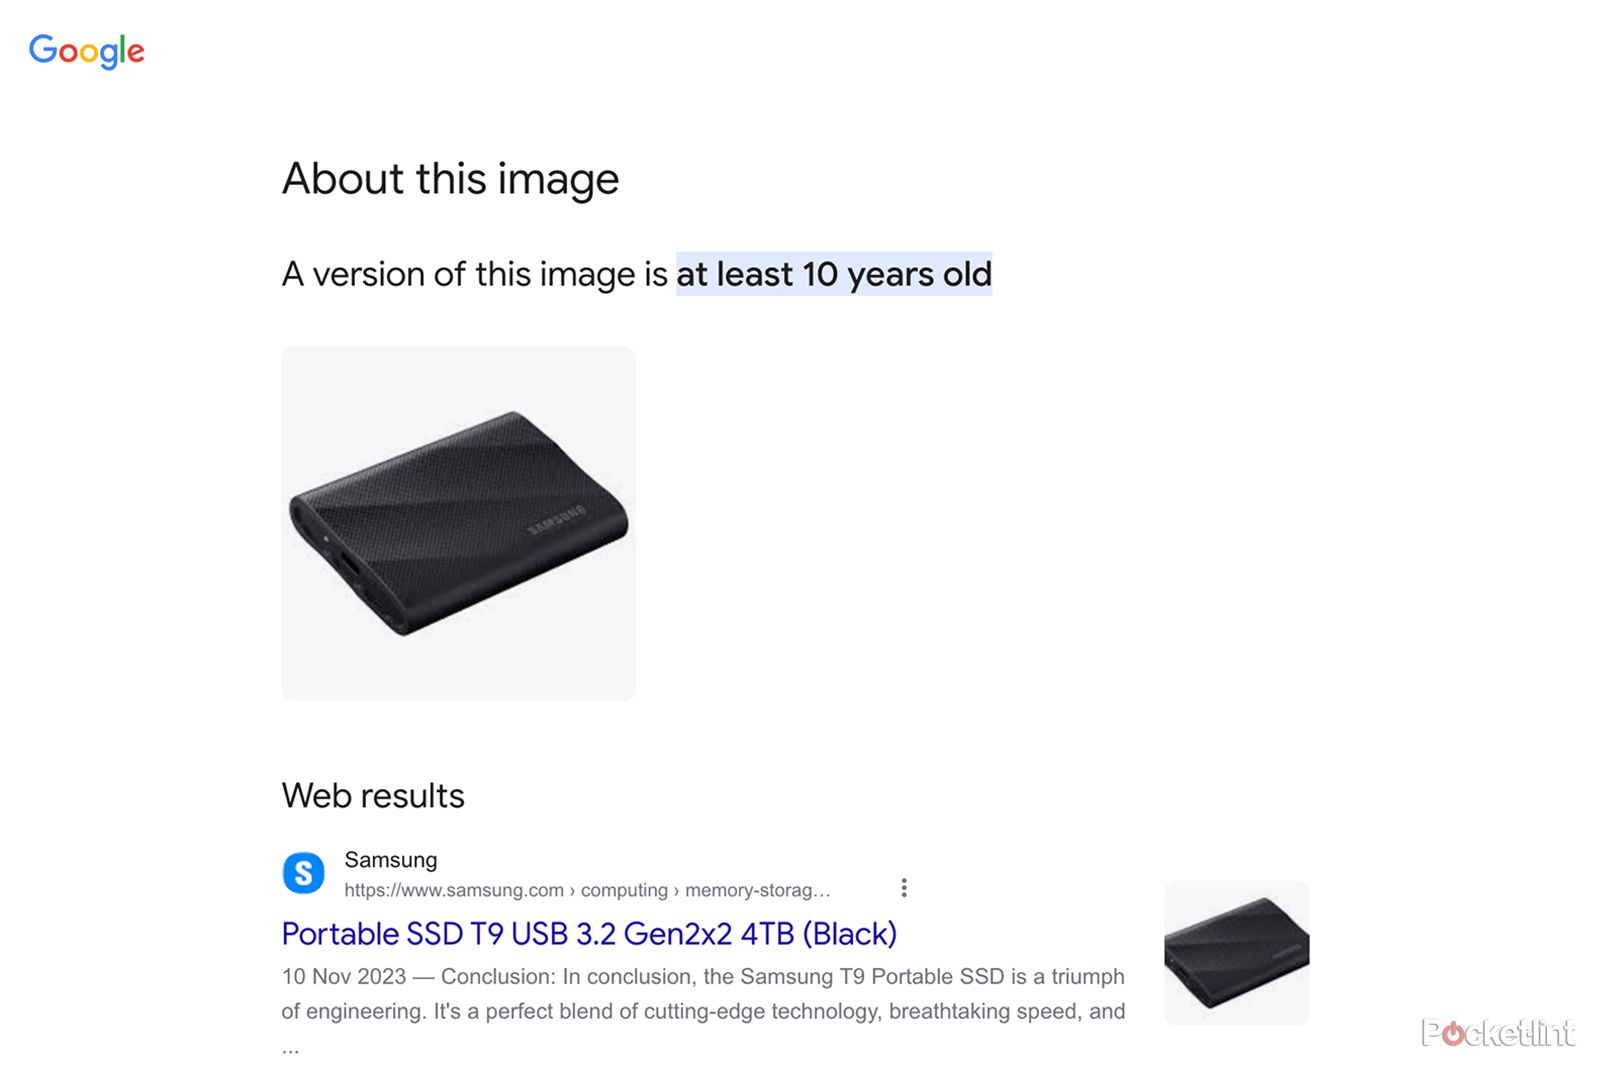 Google About this image Samsung S9 SSD screenshot